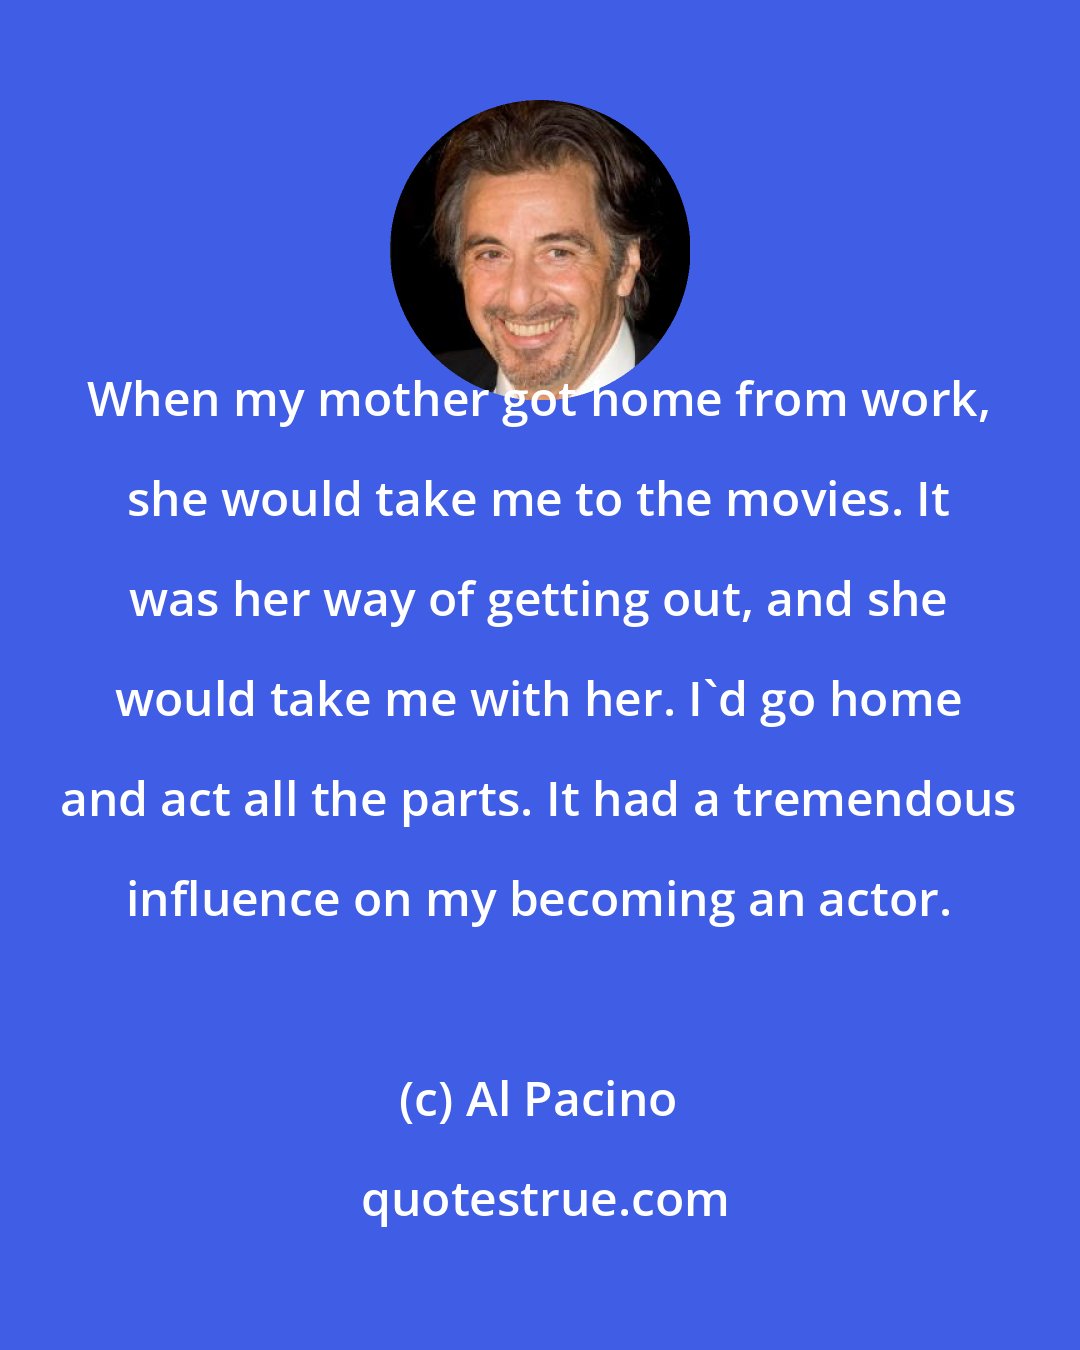 Al Pacino: When my mother got home from work, she would take me to the movies. It was her way of getting out, and she would take me with her. I'd go home and act all the parts. It had a tremendous influence on my becoming an actor.